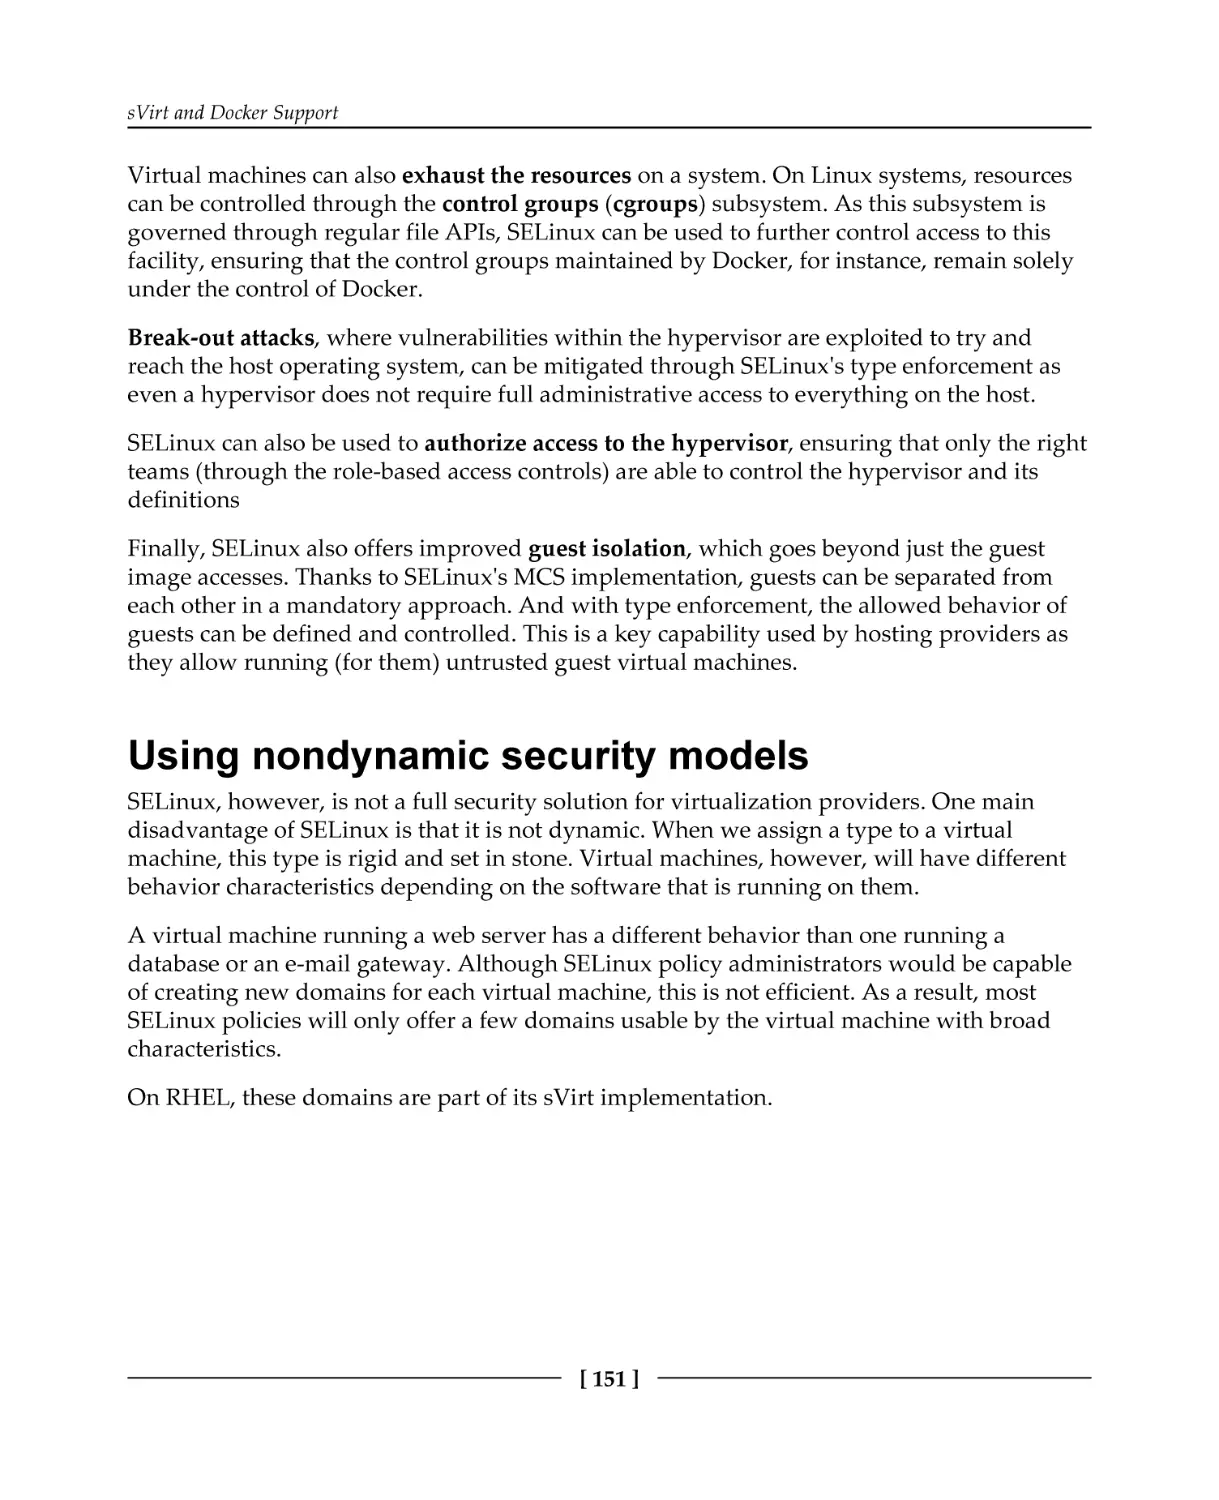 Using nondynamic security models